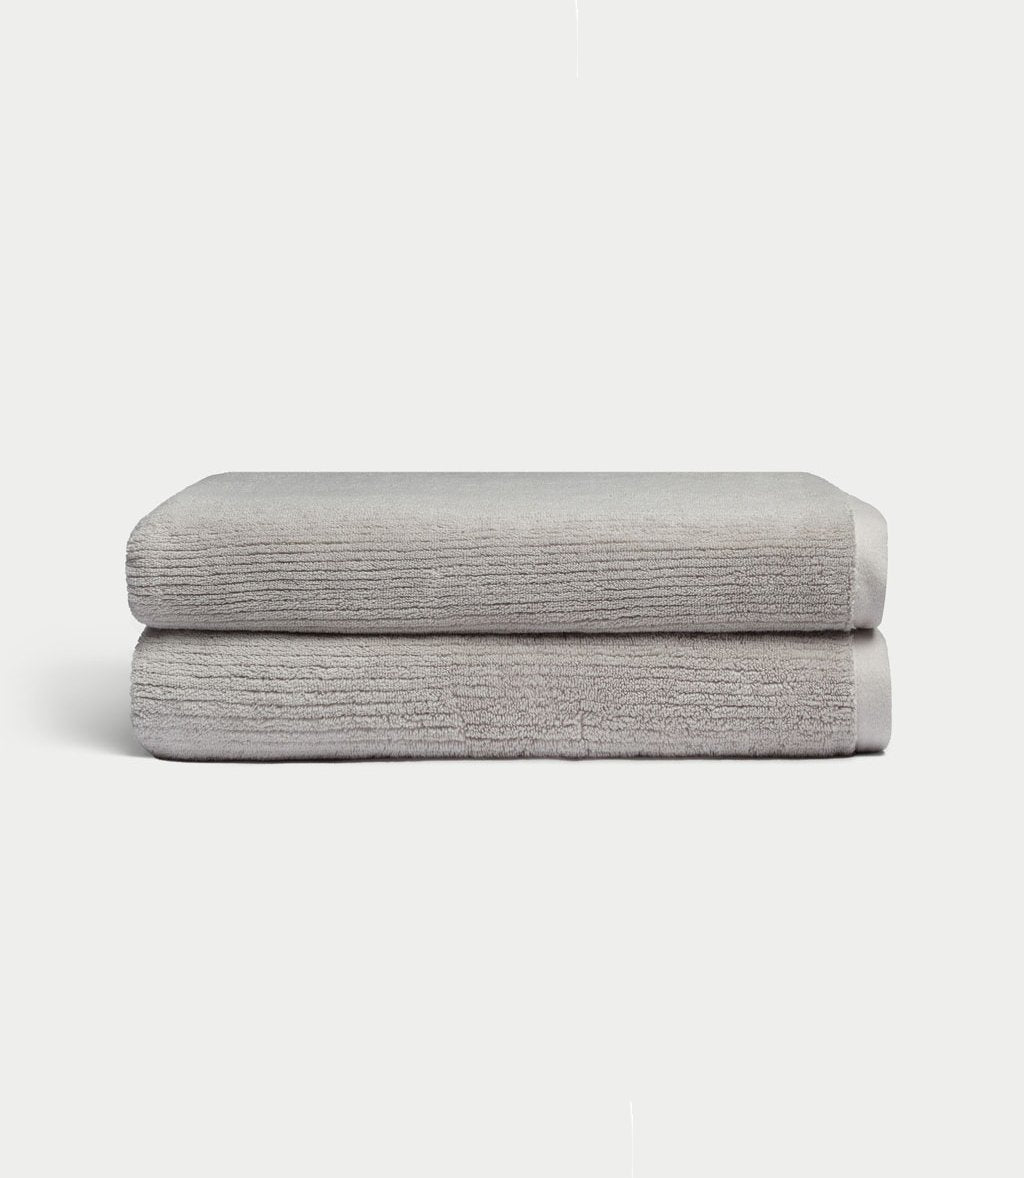 Ribbed Terry Bath Sheets in the color Light Grey. Photo of product taken with white background. 